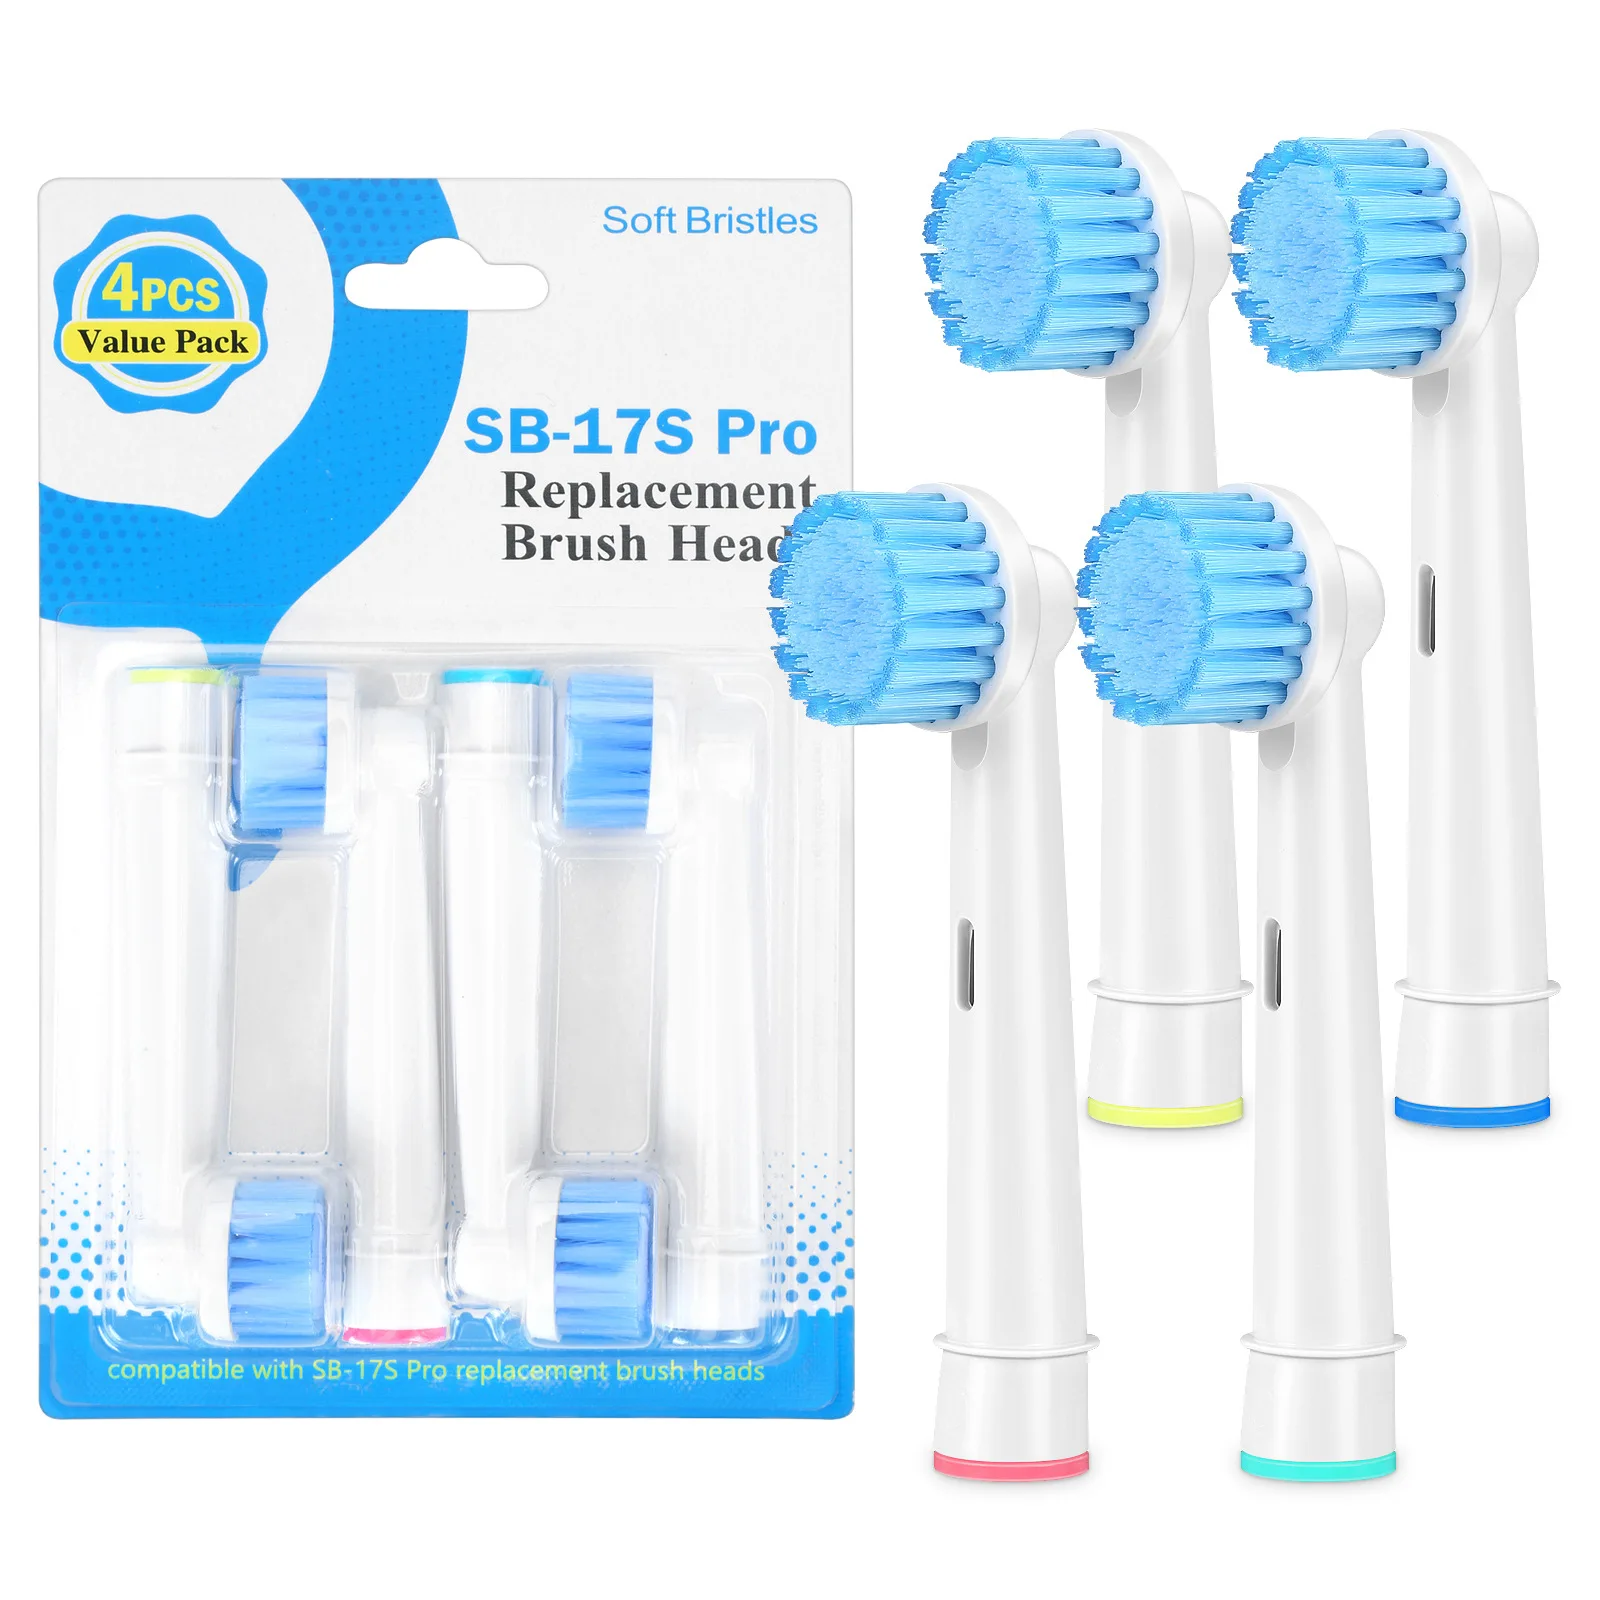 4 Pcs/Pack Replacement Brush Heads For Oral B Electric Toothbrush Head Soft Dupont Bristle Teeth Cleaning & Whitening Brush Head 8 12 16 pcs replacement brush heads for seago fairywill electric toothbrush dupont bristle brush refill efficient tooth cleaning